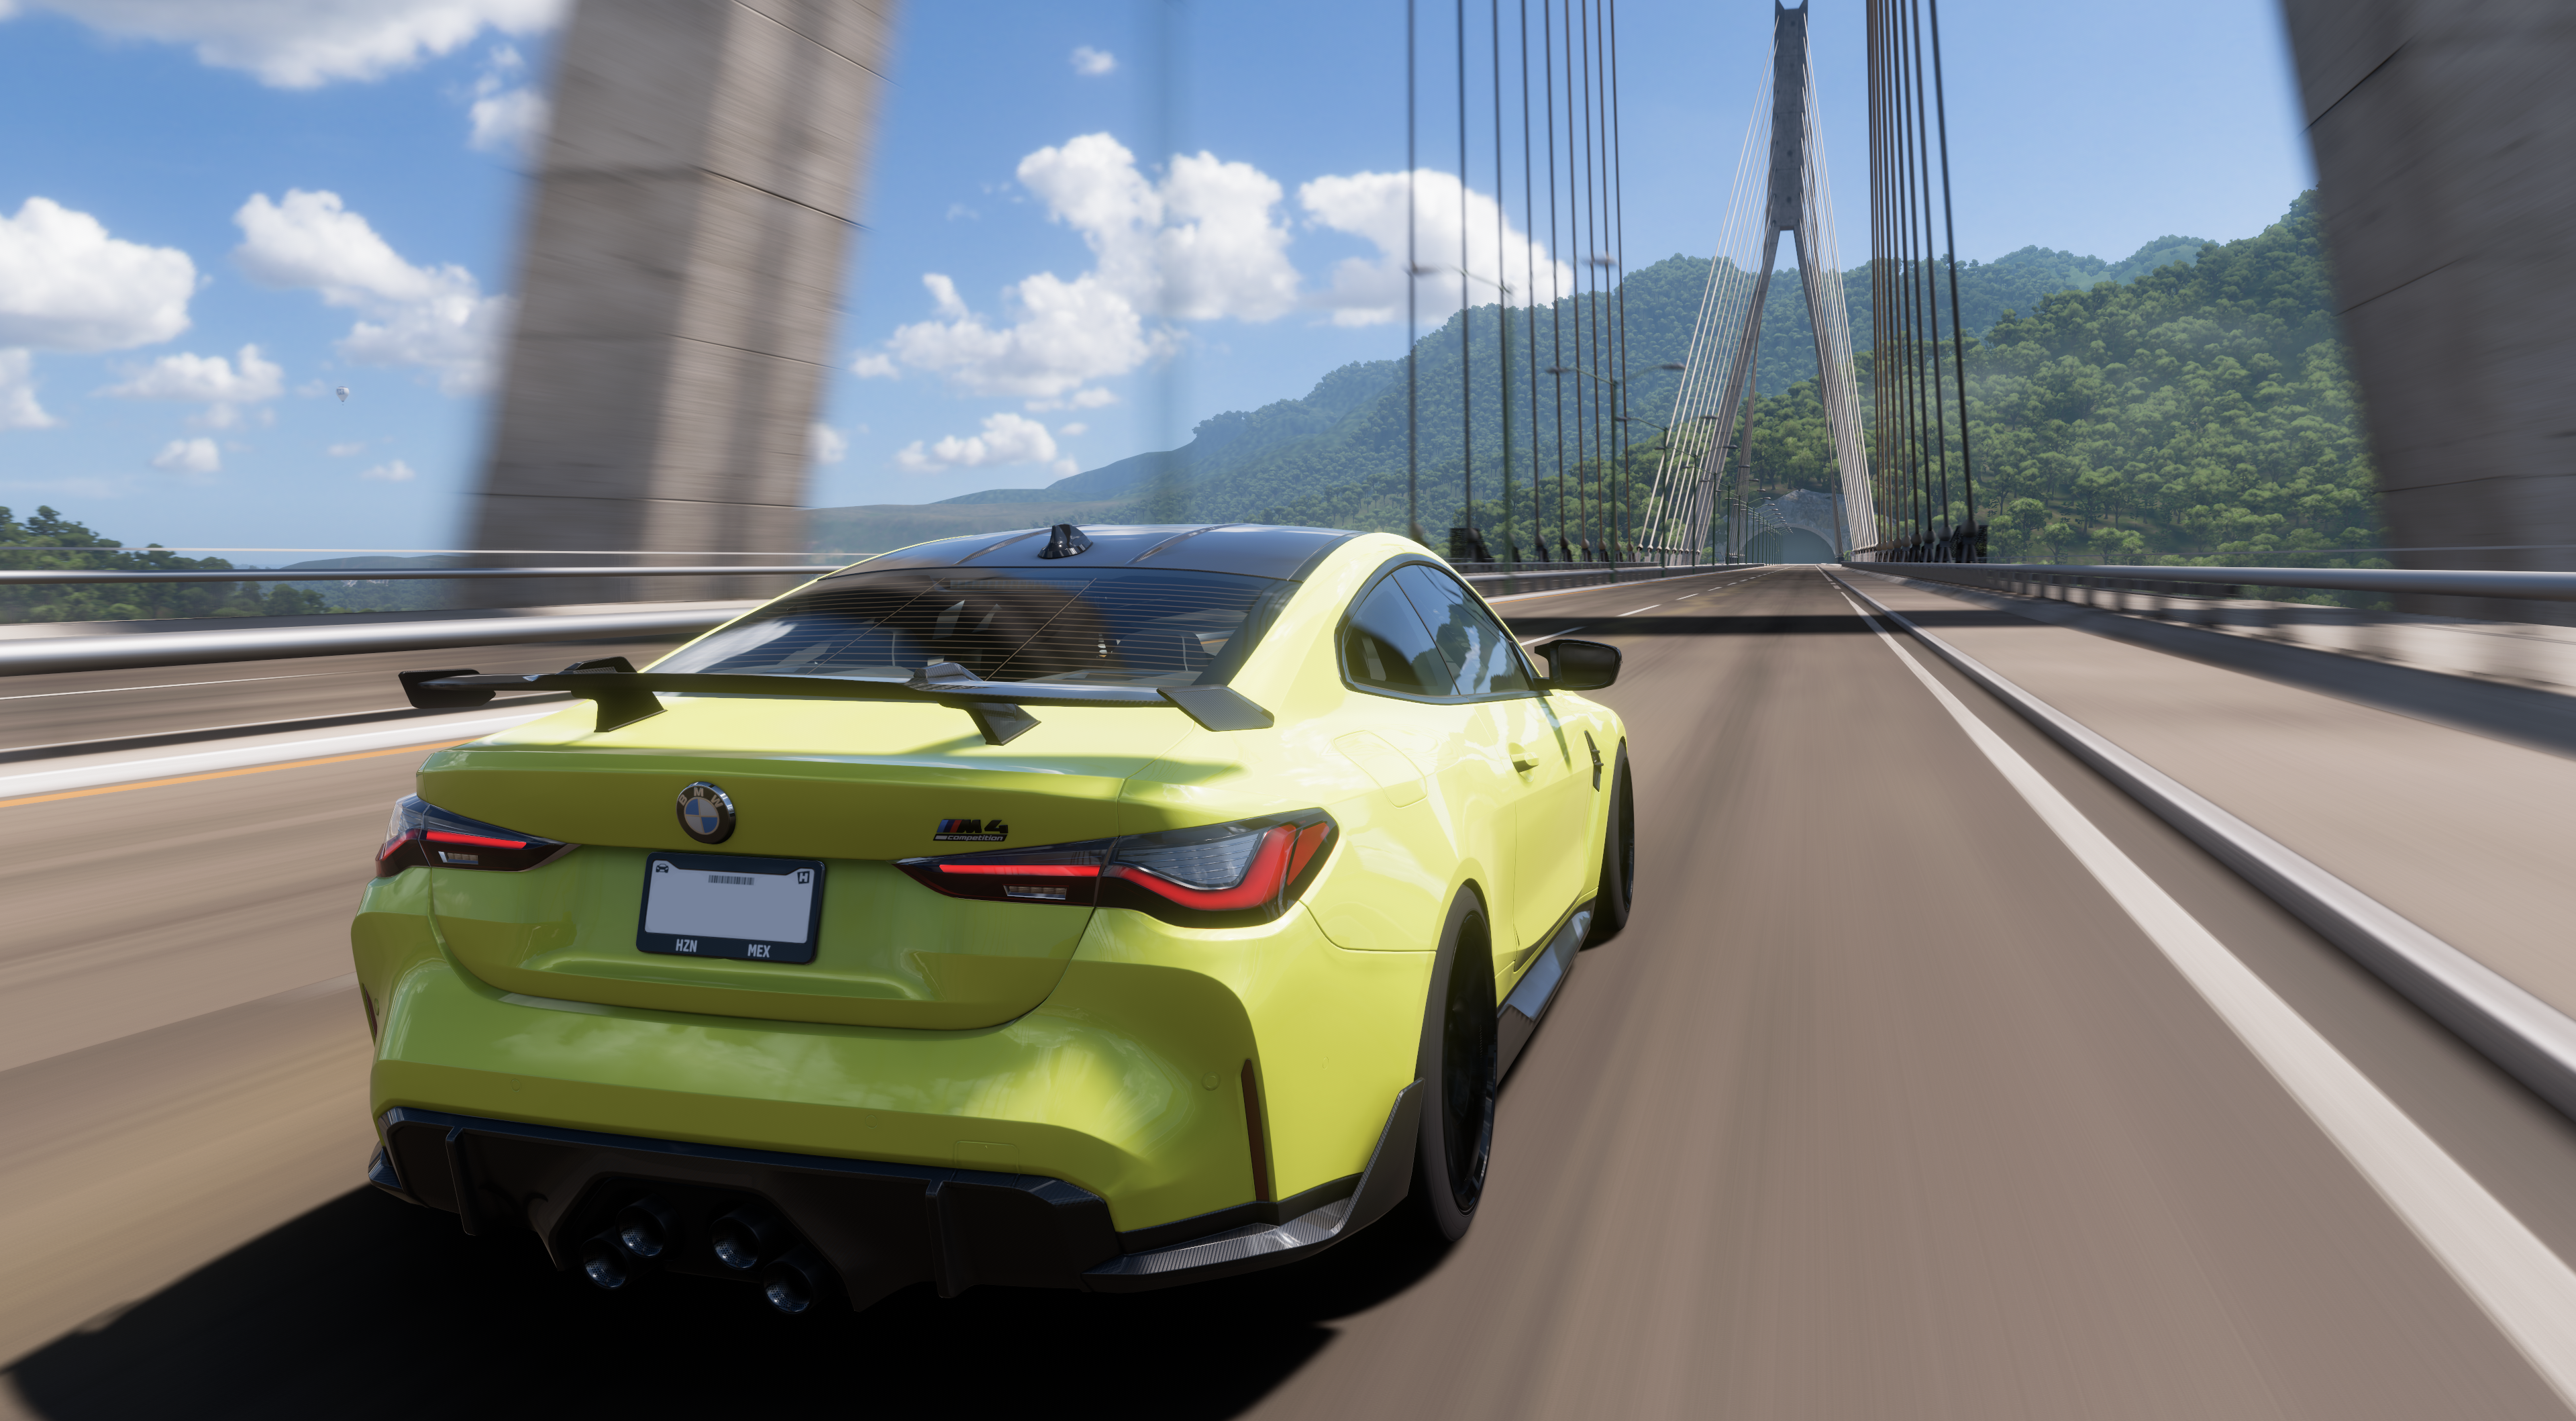 BMW Forza Horizon 5 Yellow Car Competition Video Games Clouds Road Rear View CGi Licence Plates 3839x2117